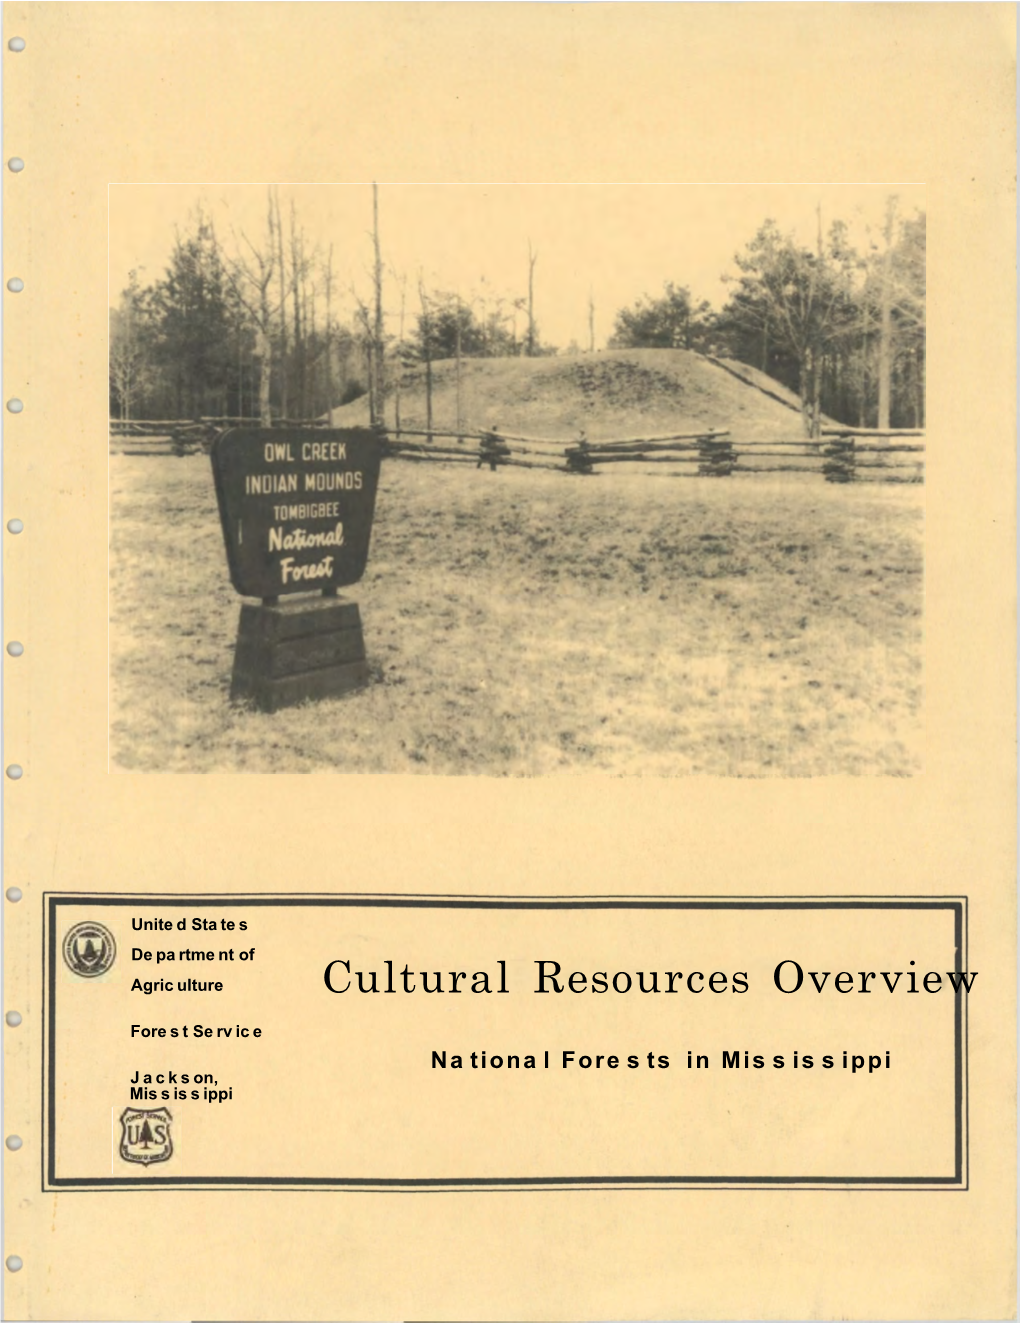 Cultural Resources Overview